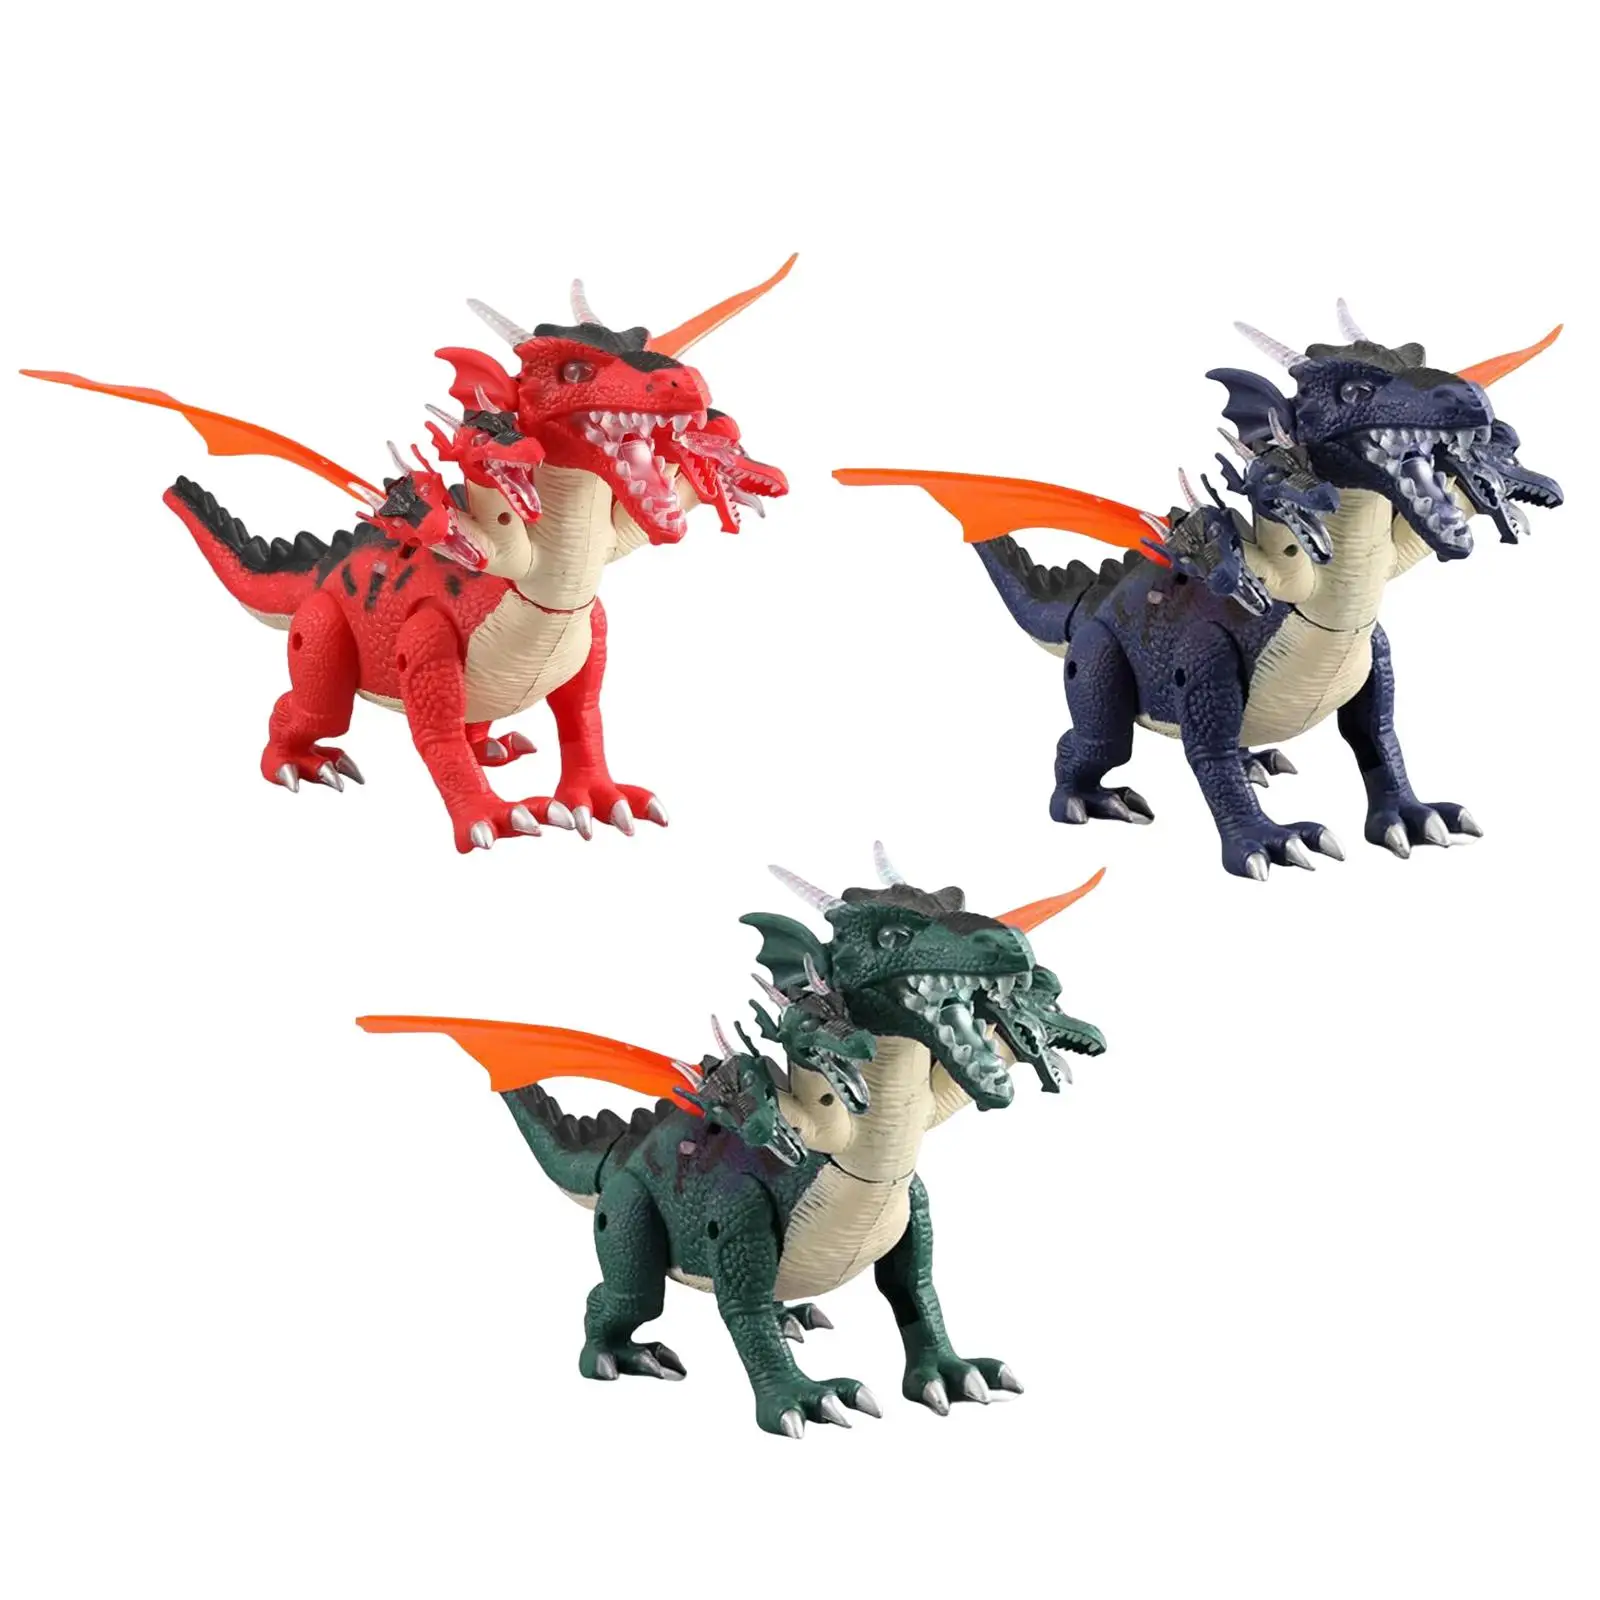 Electric Dinosaur Toys Spray with Lights Realistic Sounds Walking Robot Dinosaur Educational Toys Birthday Gifts for Girls Boys